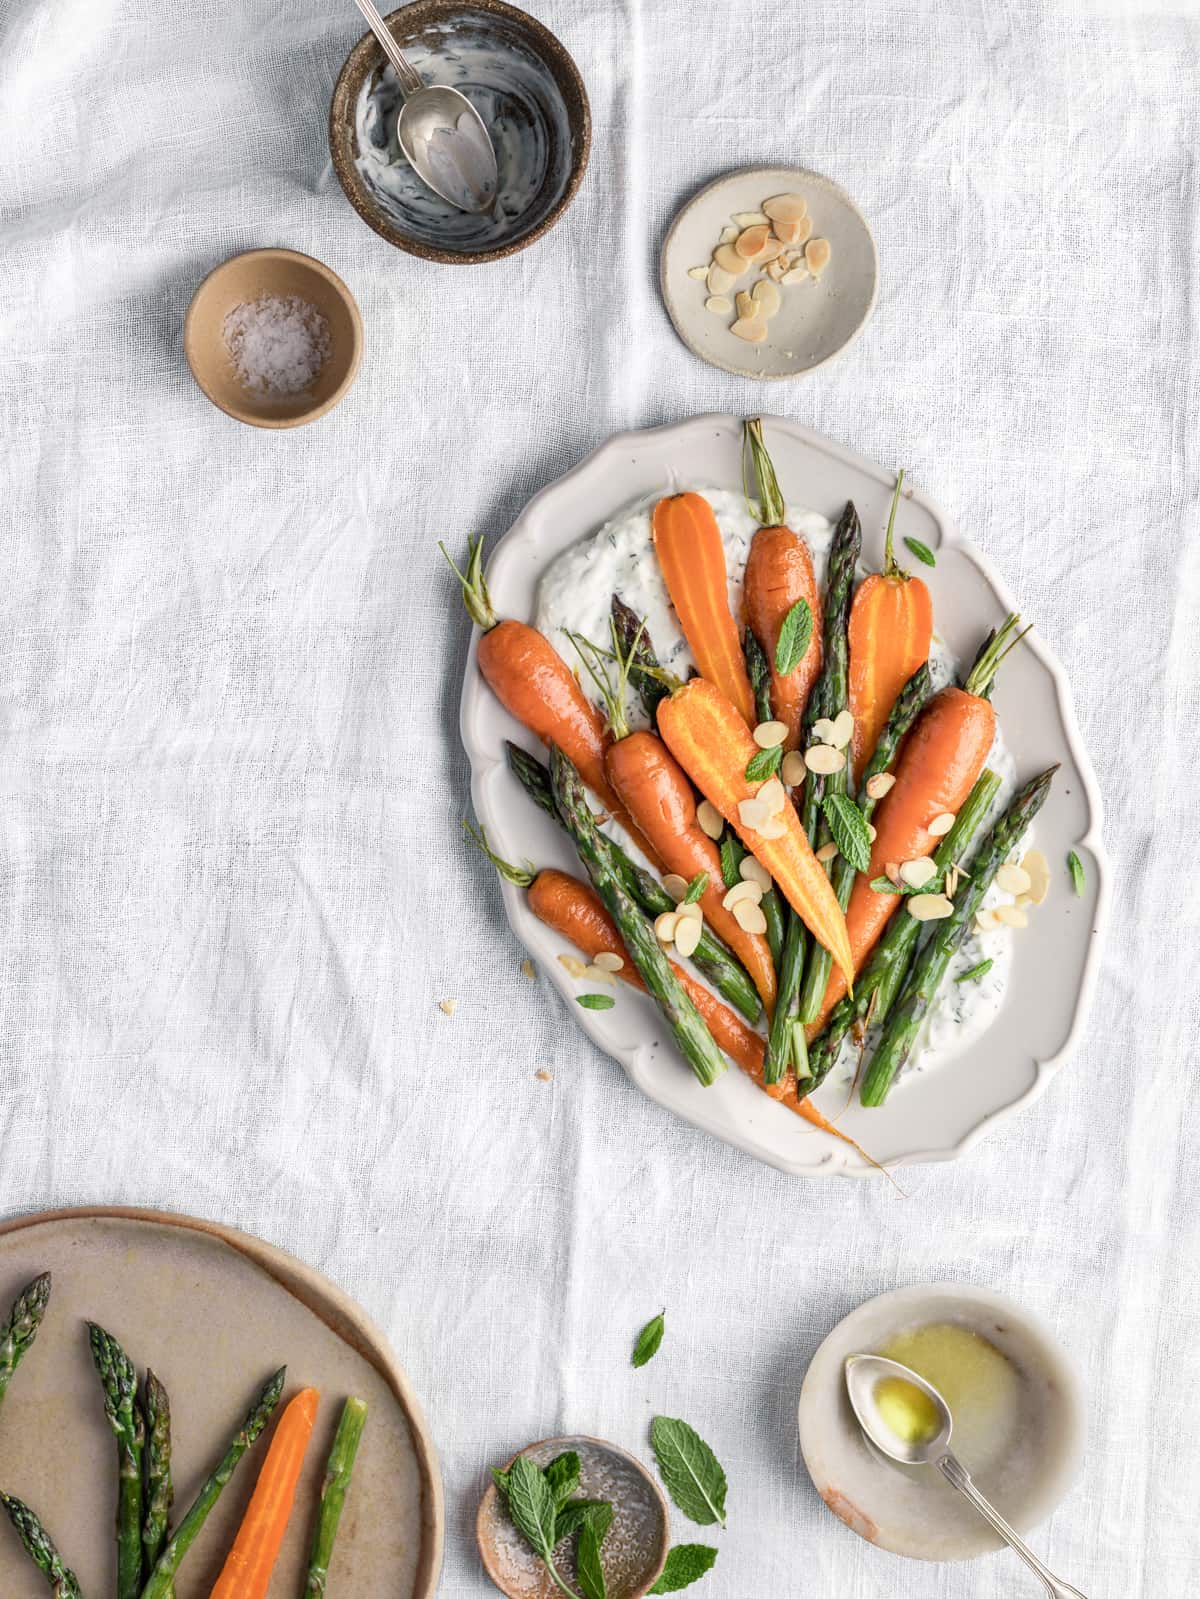 Overhead shot of serving plate with carrots and asparagus on a white table surrounded by littles bowls full of oil, mint leaves and yogurt dip.